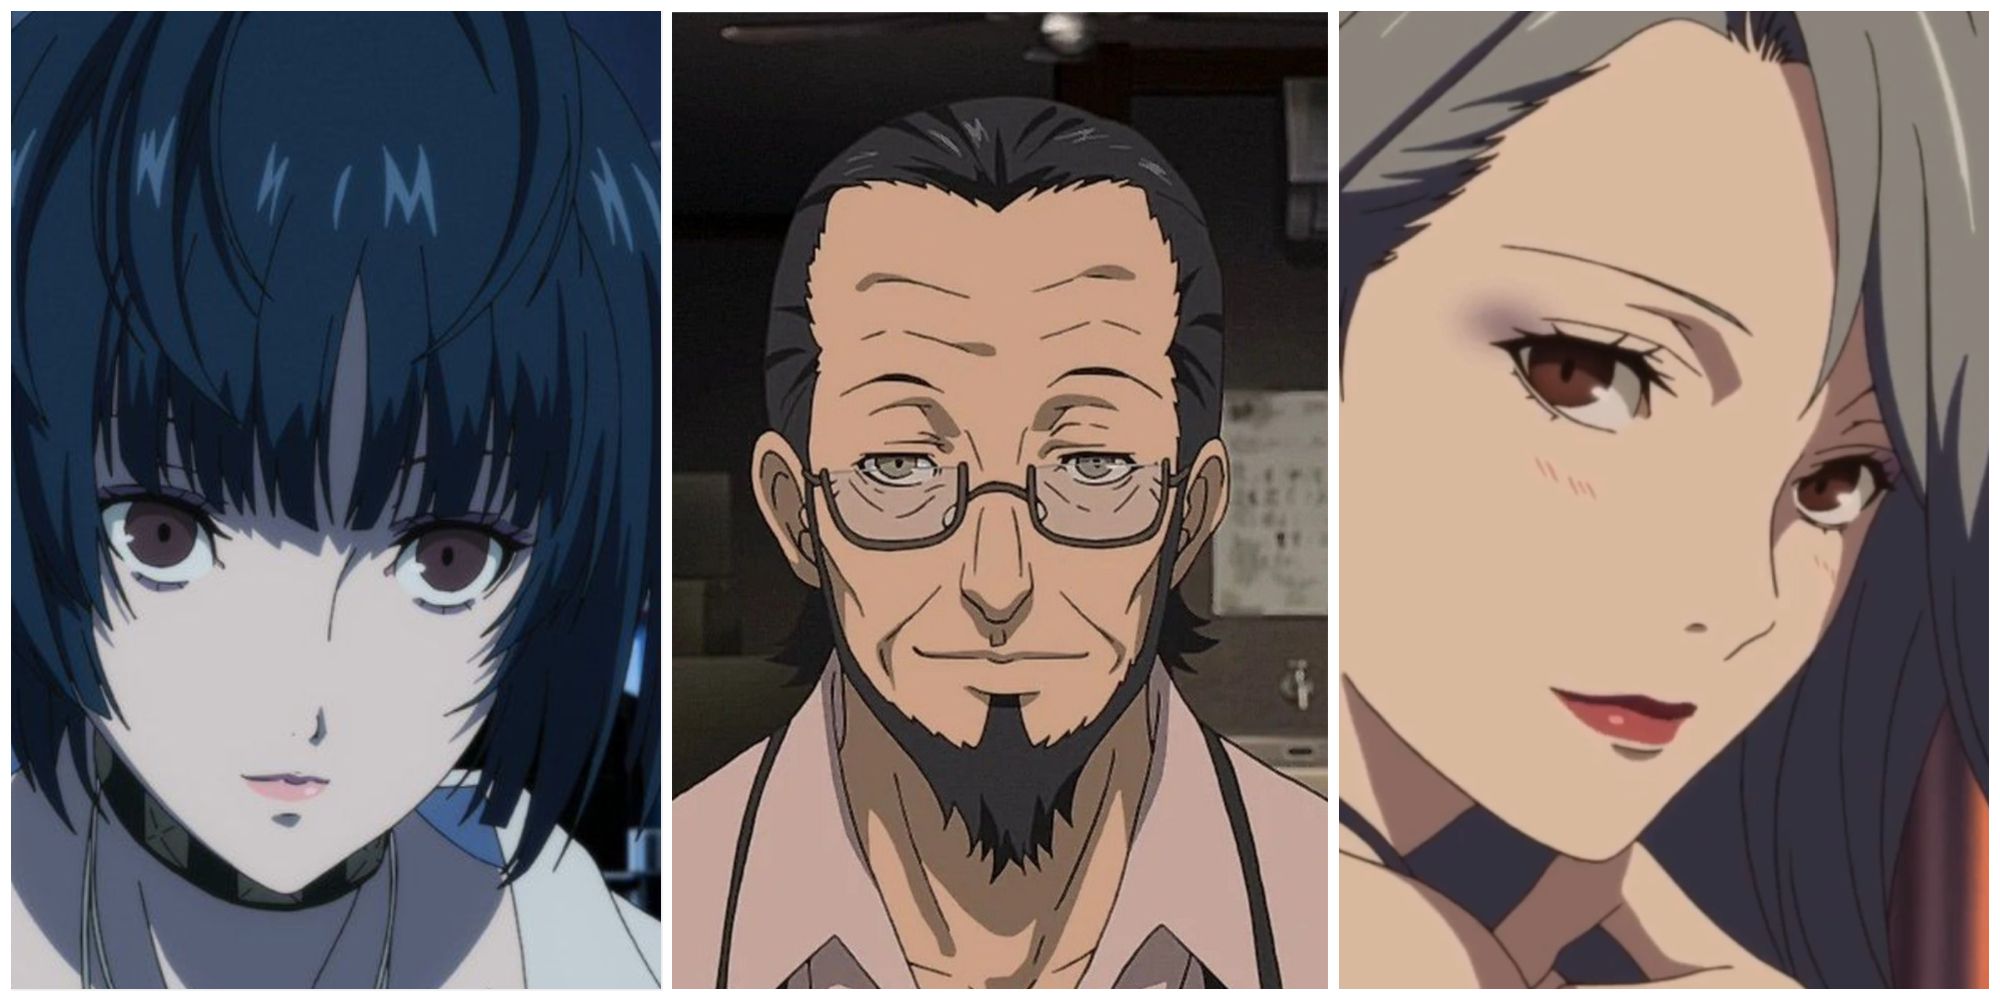 on the left is Tae from Persona 5 Royal, in the middle is Sojiro and on the right is Sae